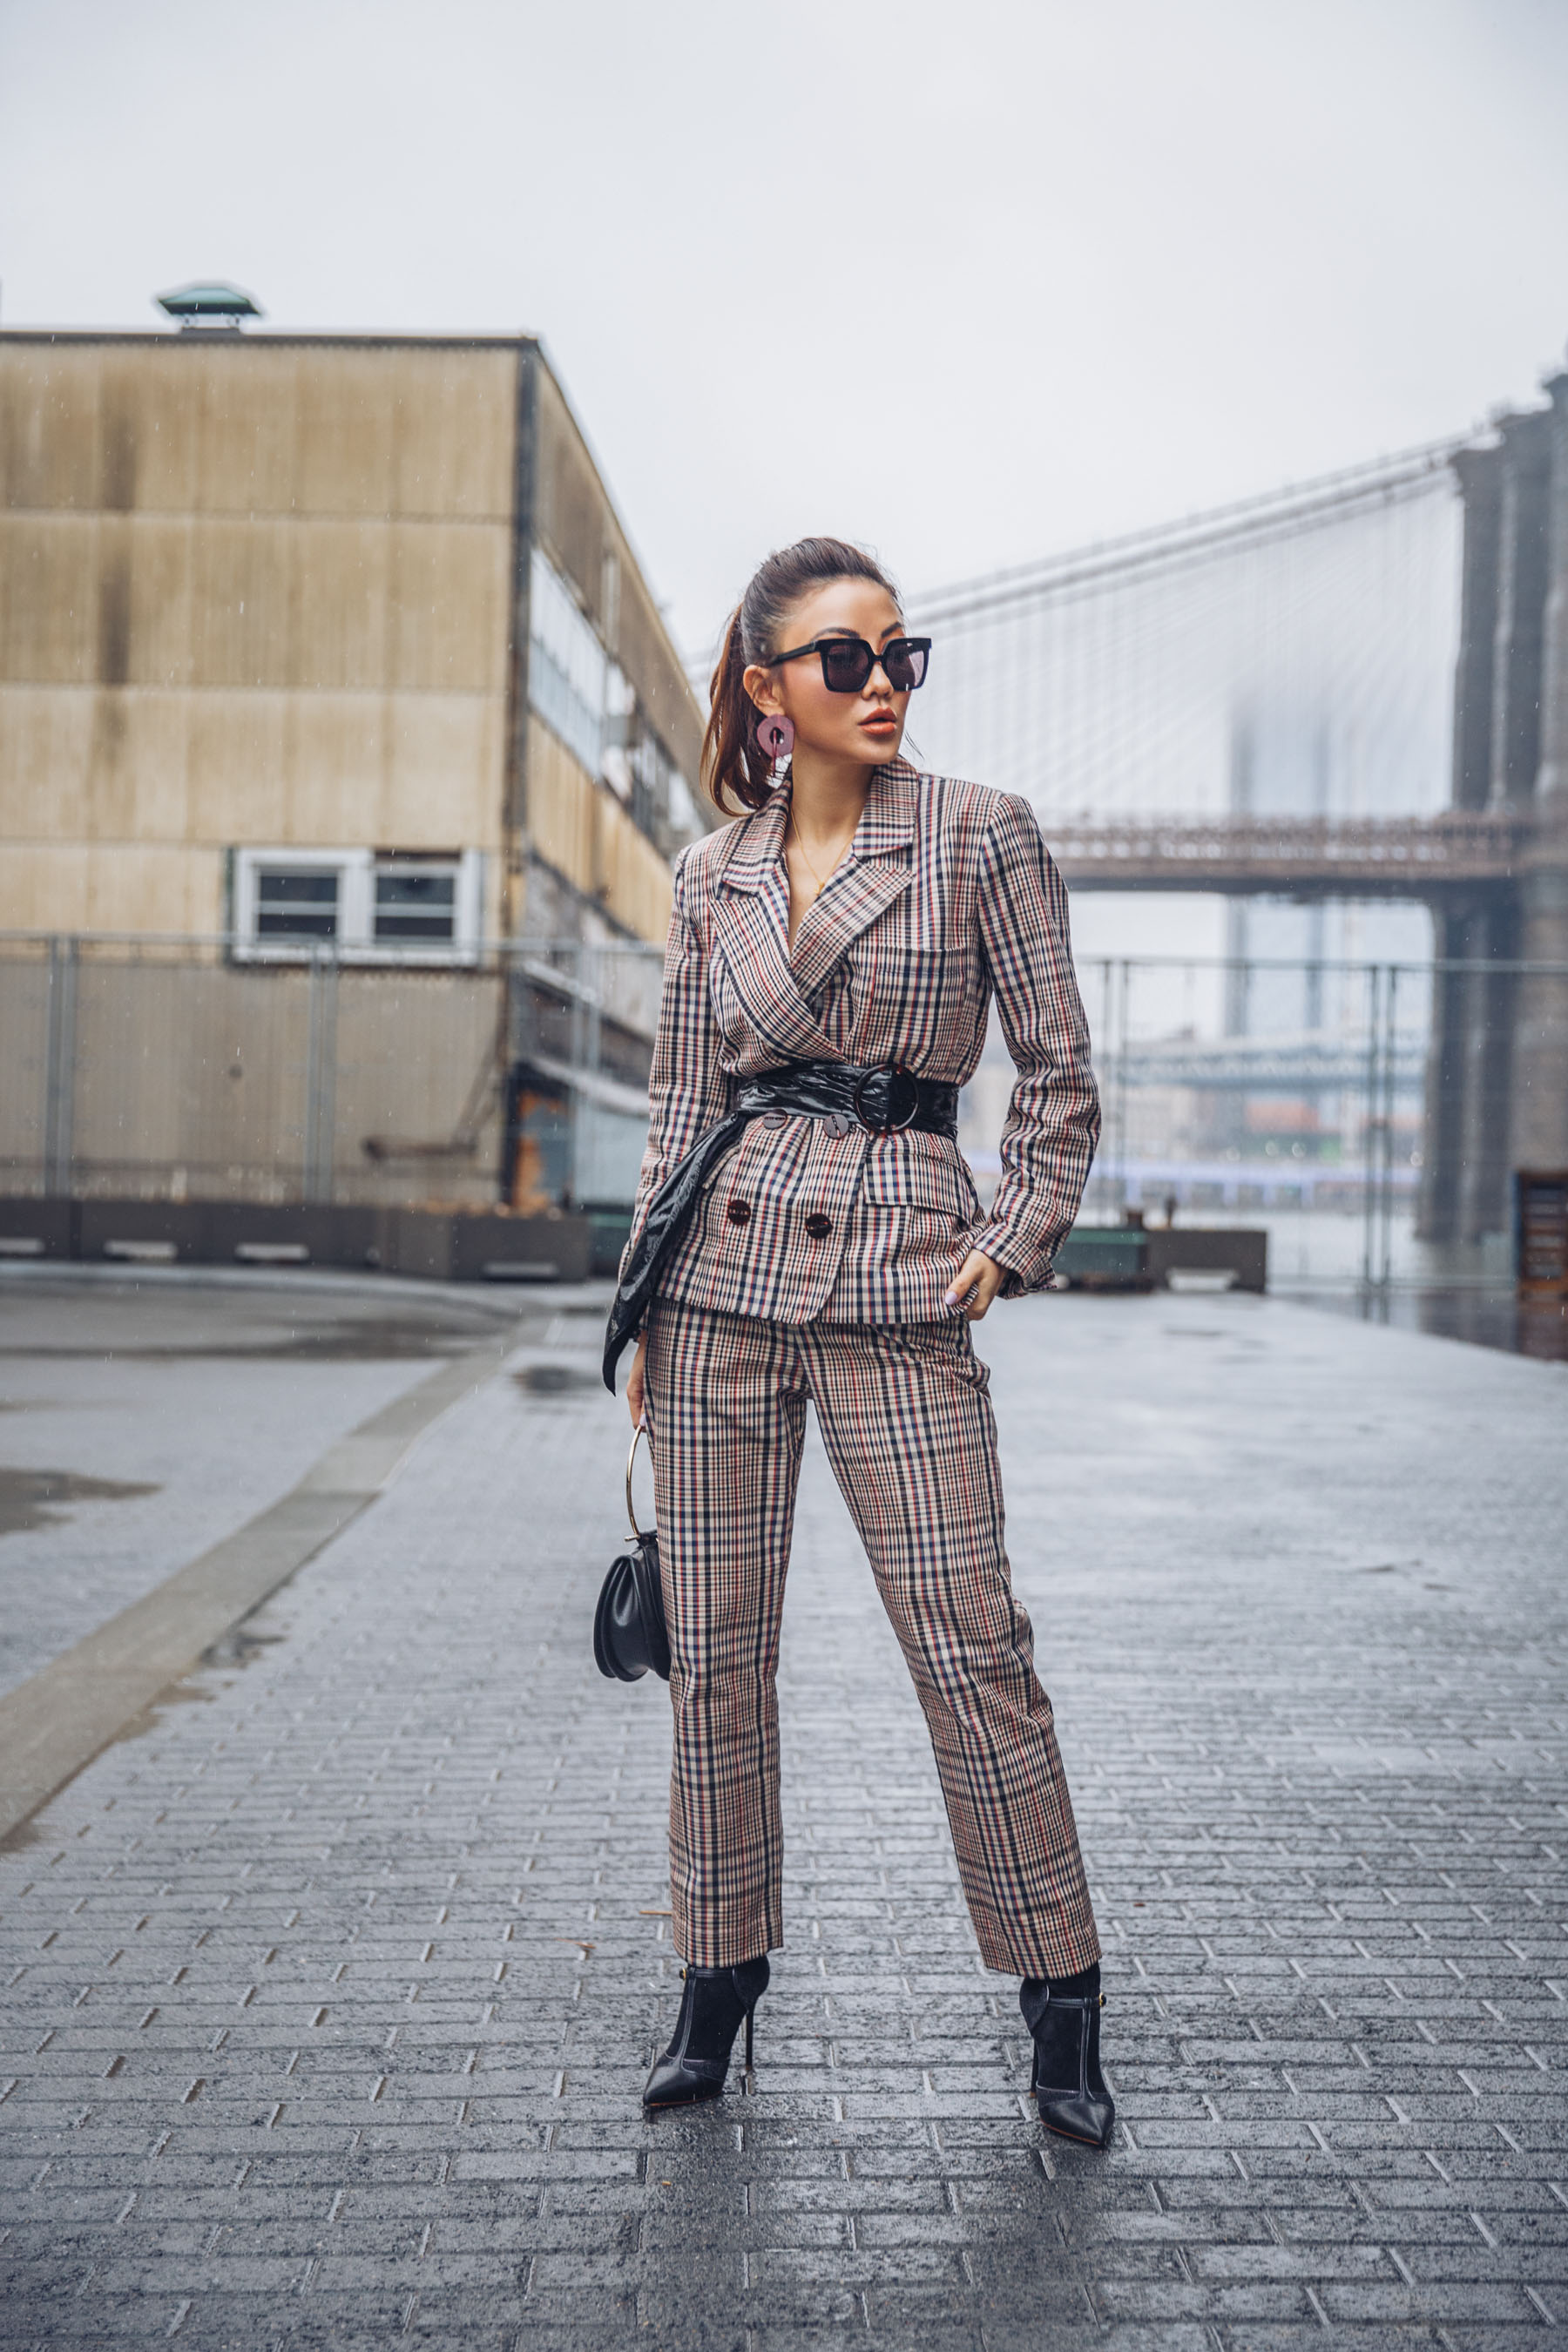 NYFW Day 4 - NotJessFashion going to Tibi Show // Notjessfashion.com // Plaid Suit with Leather Belt and Square Sunnies, NYFW 2018 street style